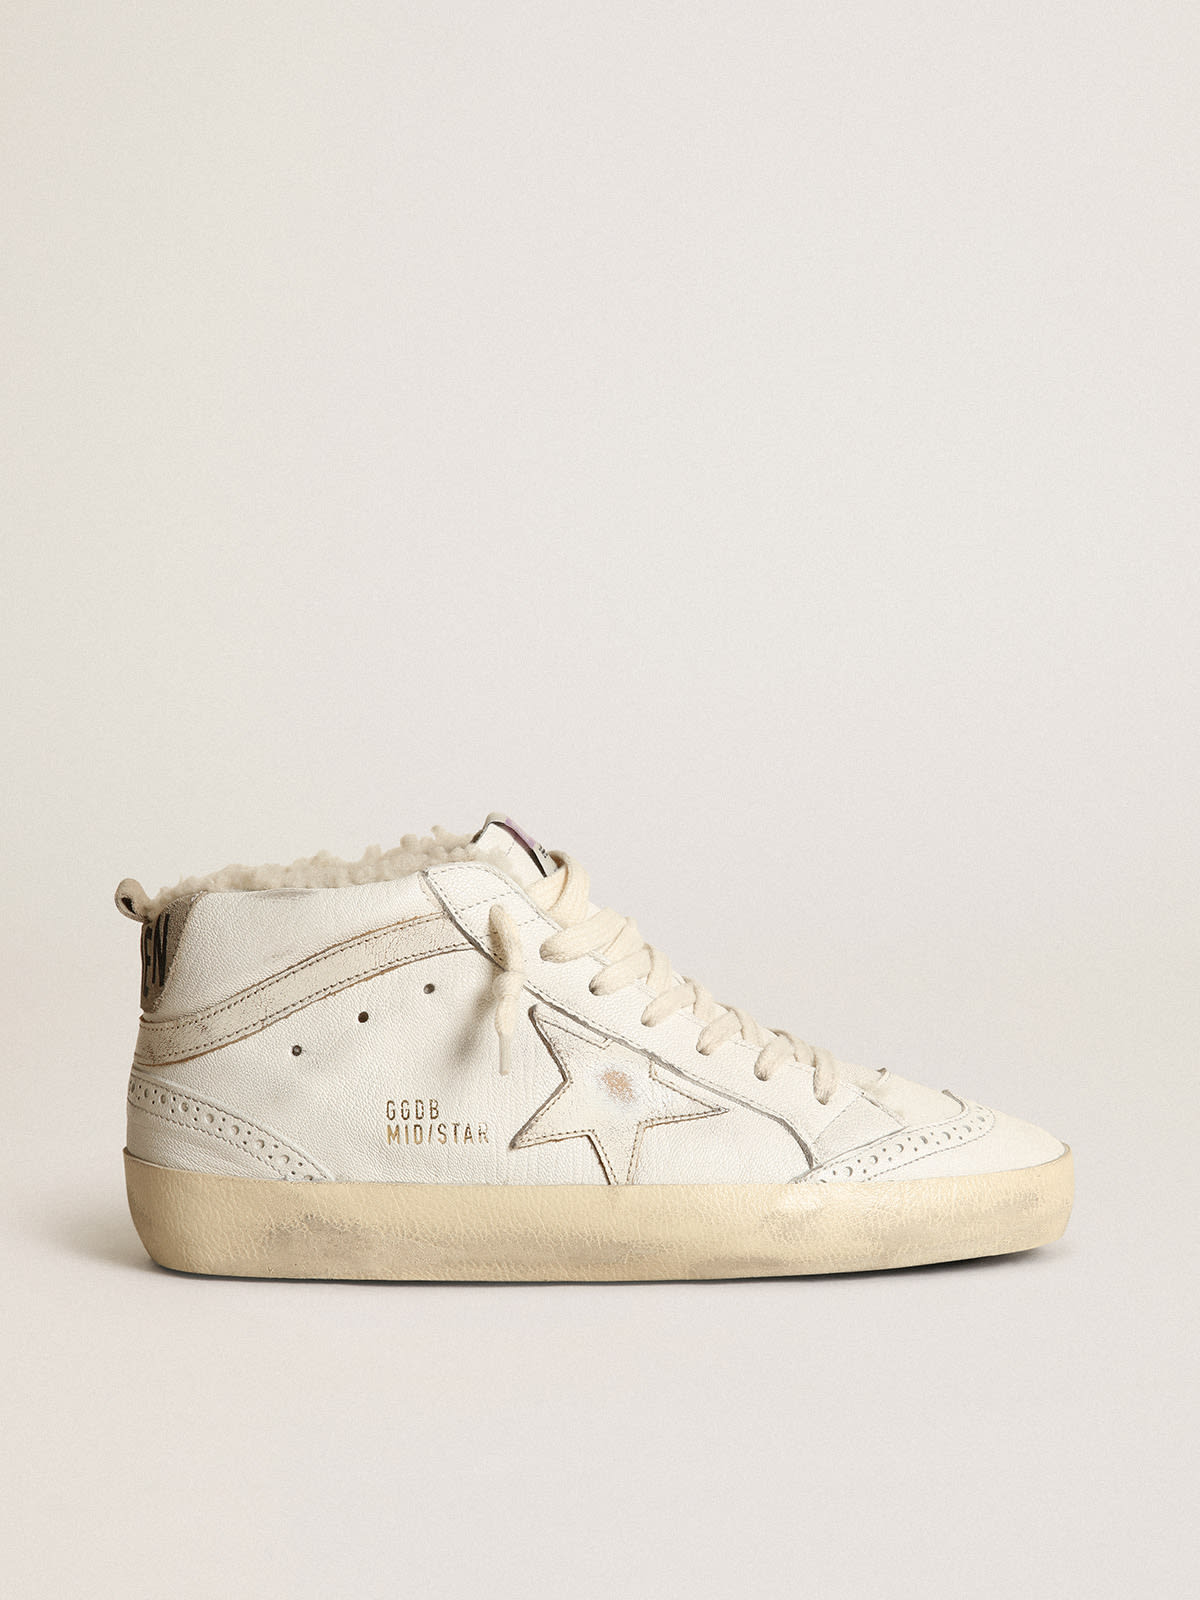 Golden Goose - Mid Star in nappa with a glossy white leather star and flash in 